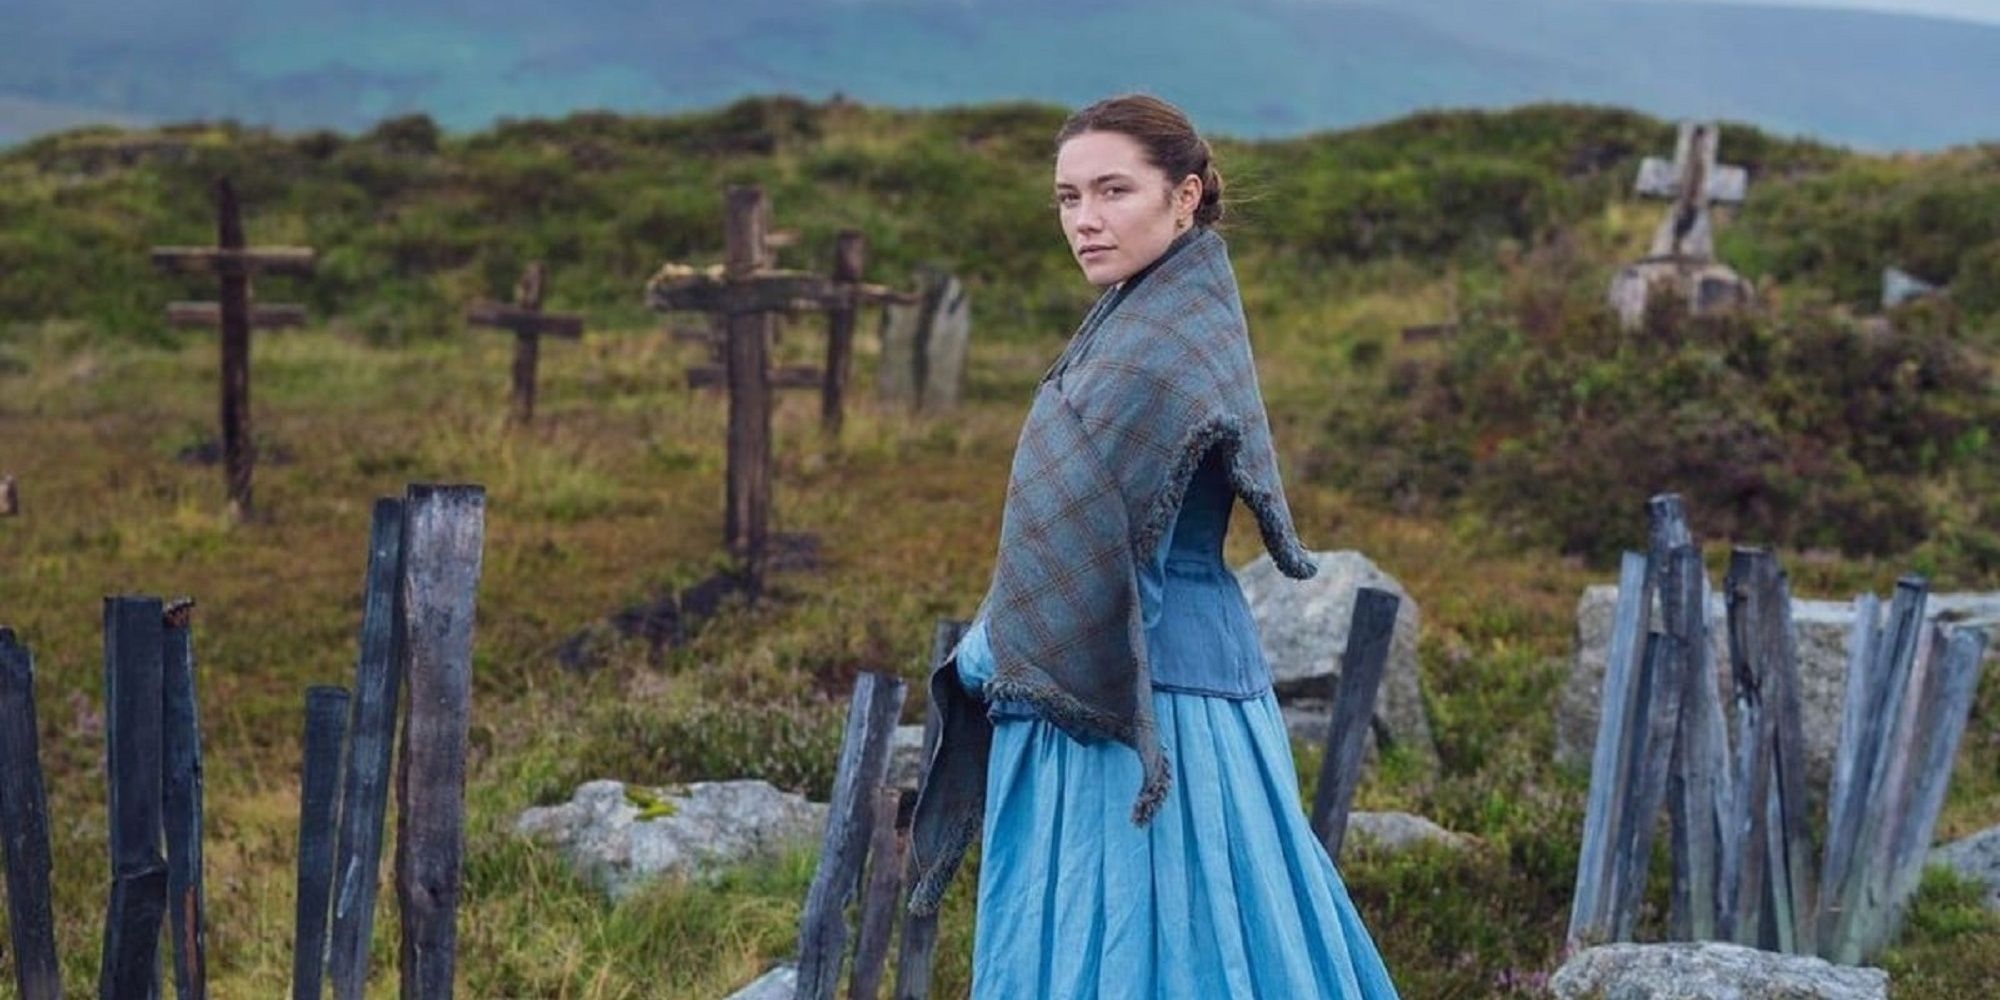 Lib, wearing a bright blue dress and standing in a graveyard in 'The Wonder.'